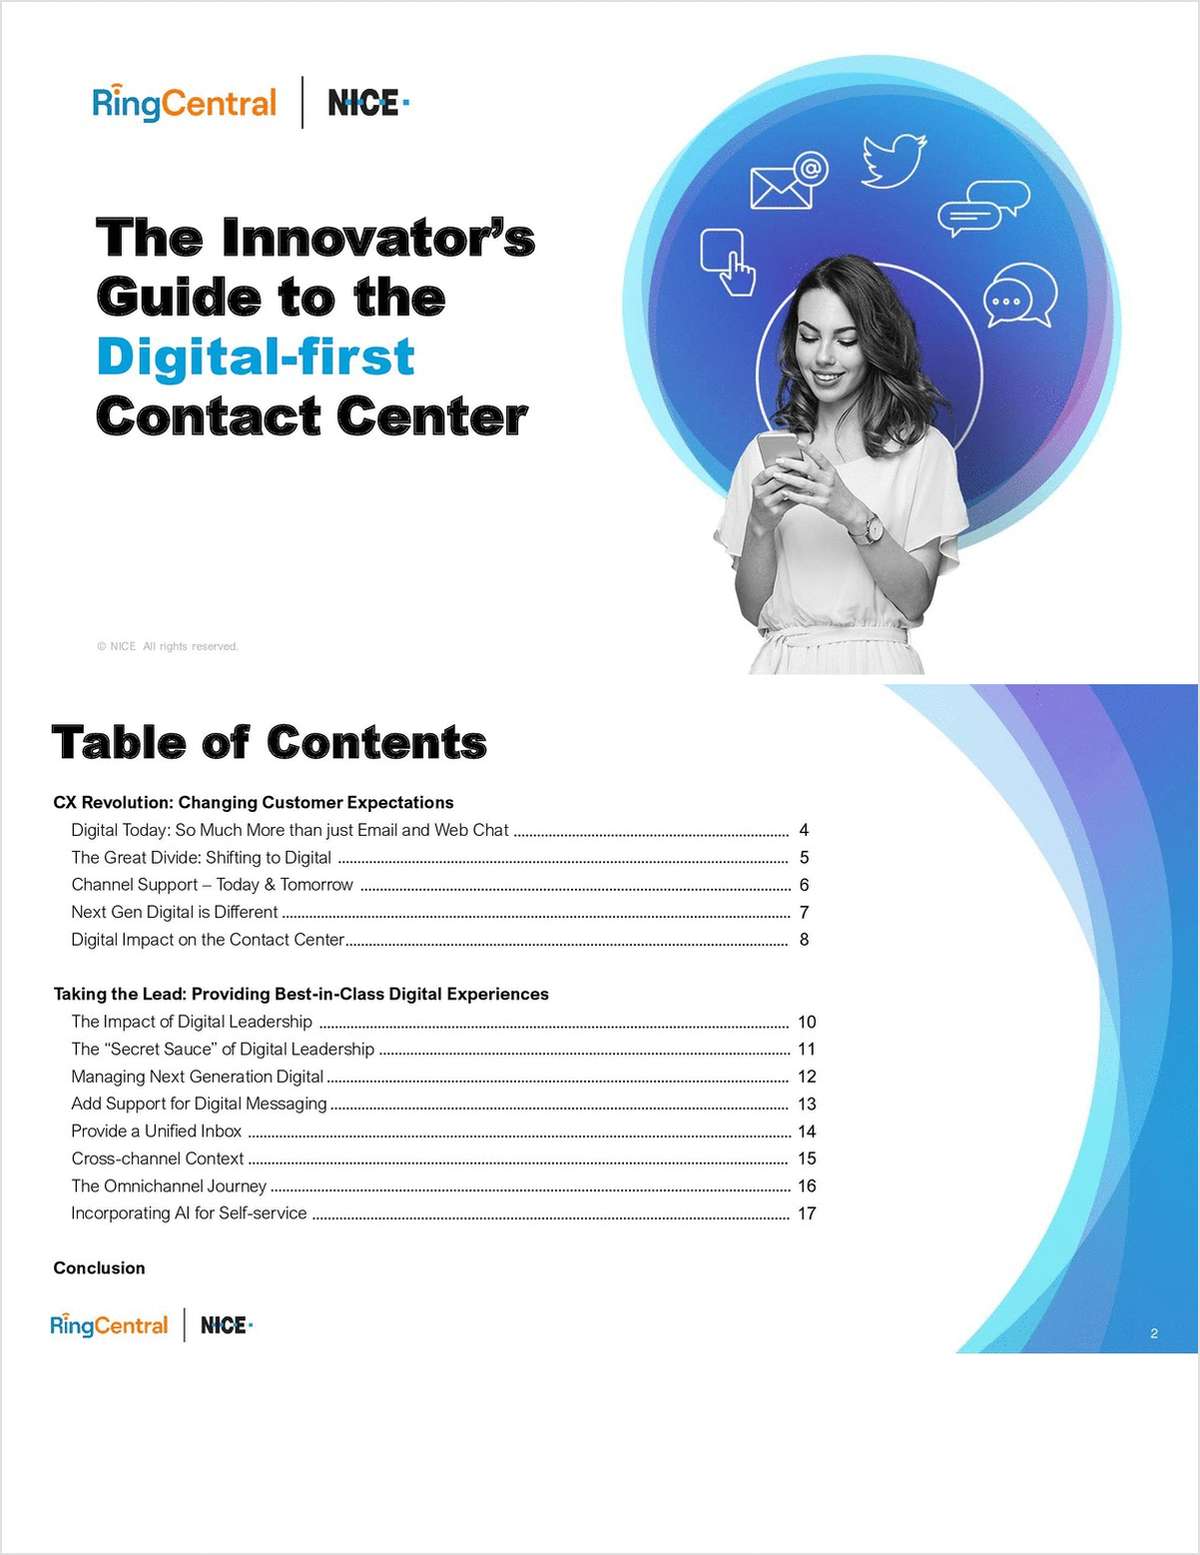 Digital-first Contact Center: The Innovator's Guide